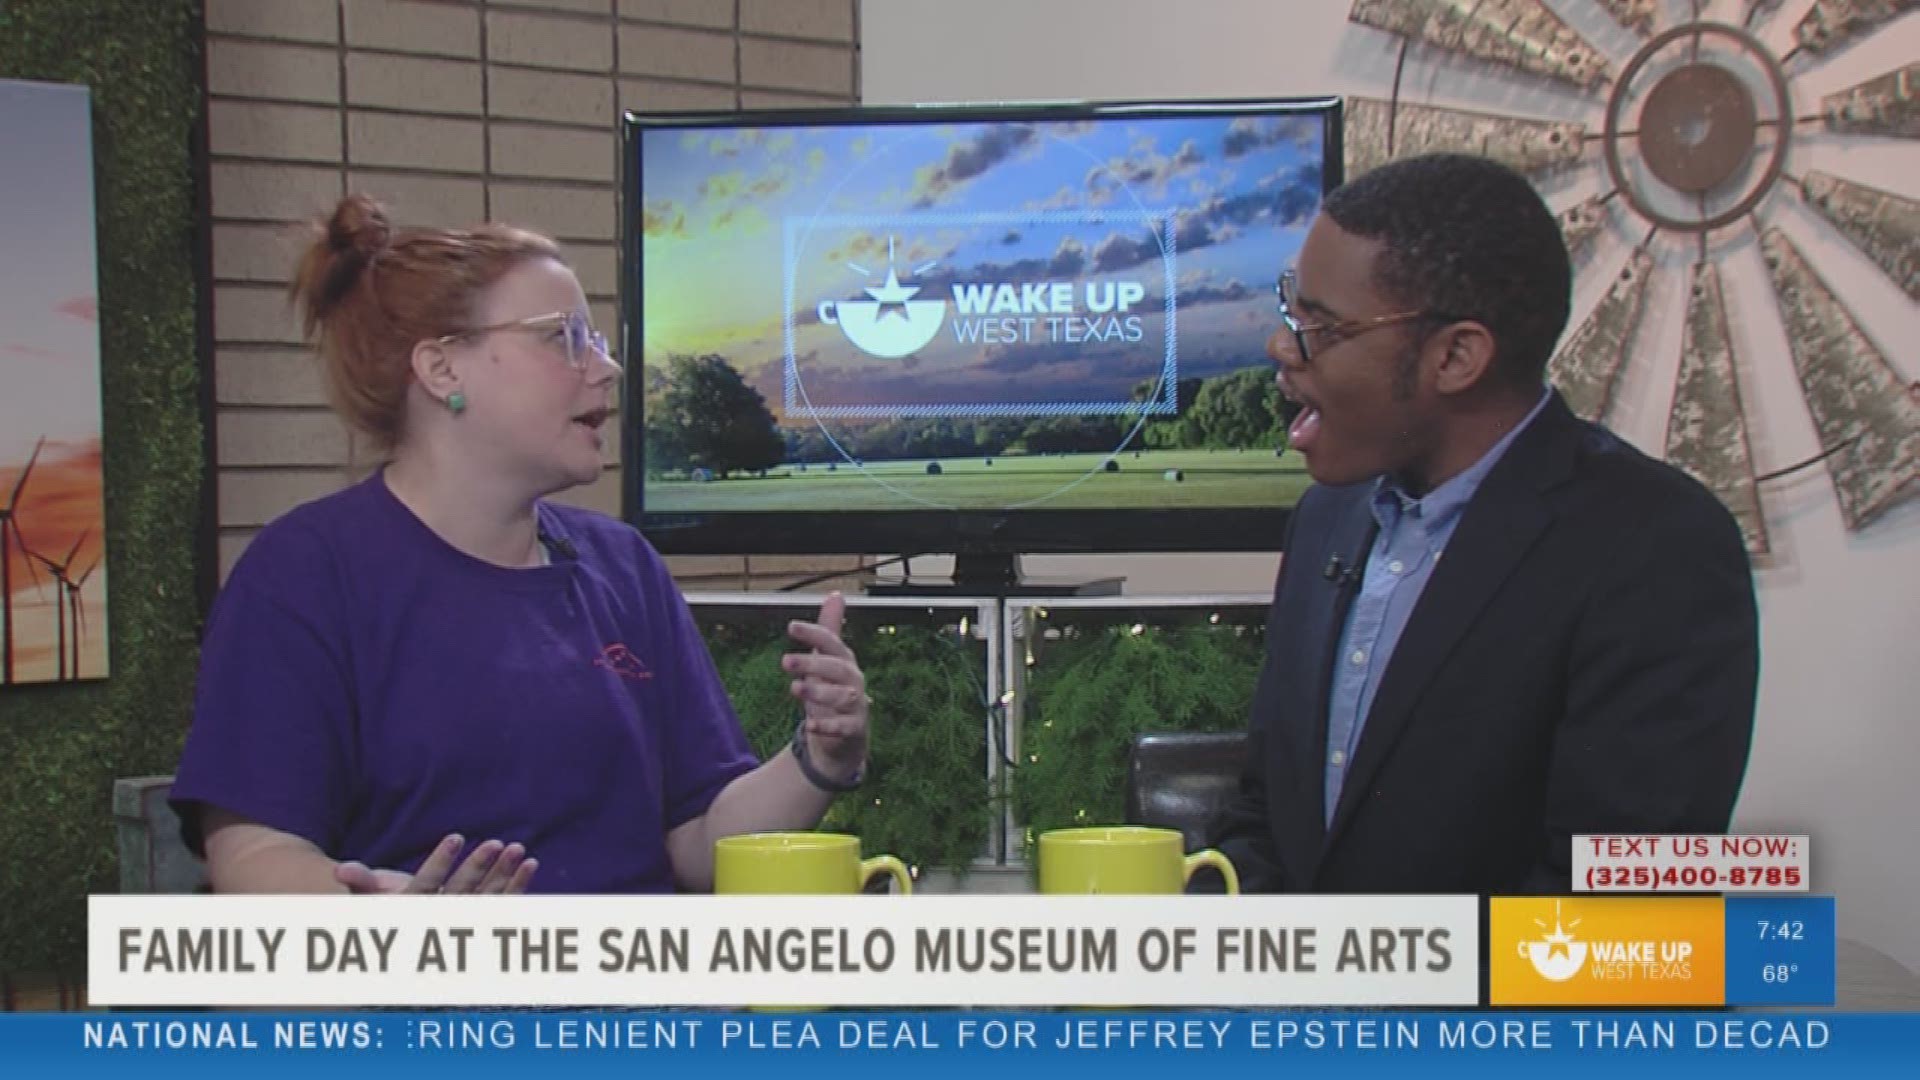 Our Malik Mingo spoke to the curator of education at the San Angelo Museum of Fine Arts about the upcoming "Family Day" on July 13.